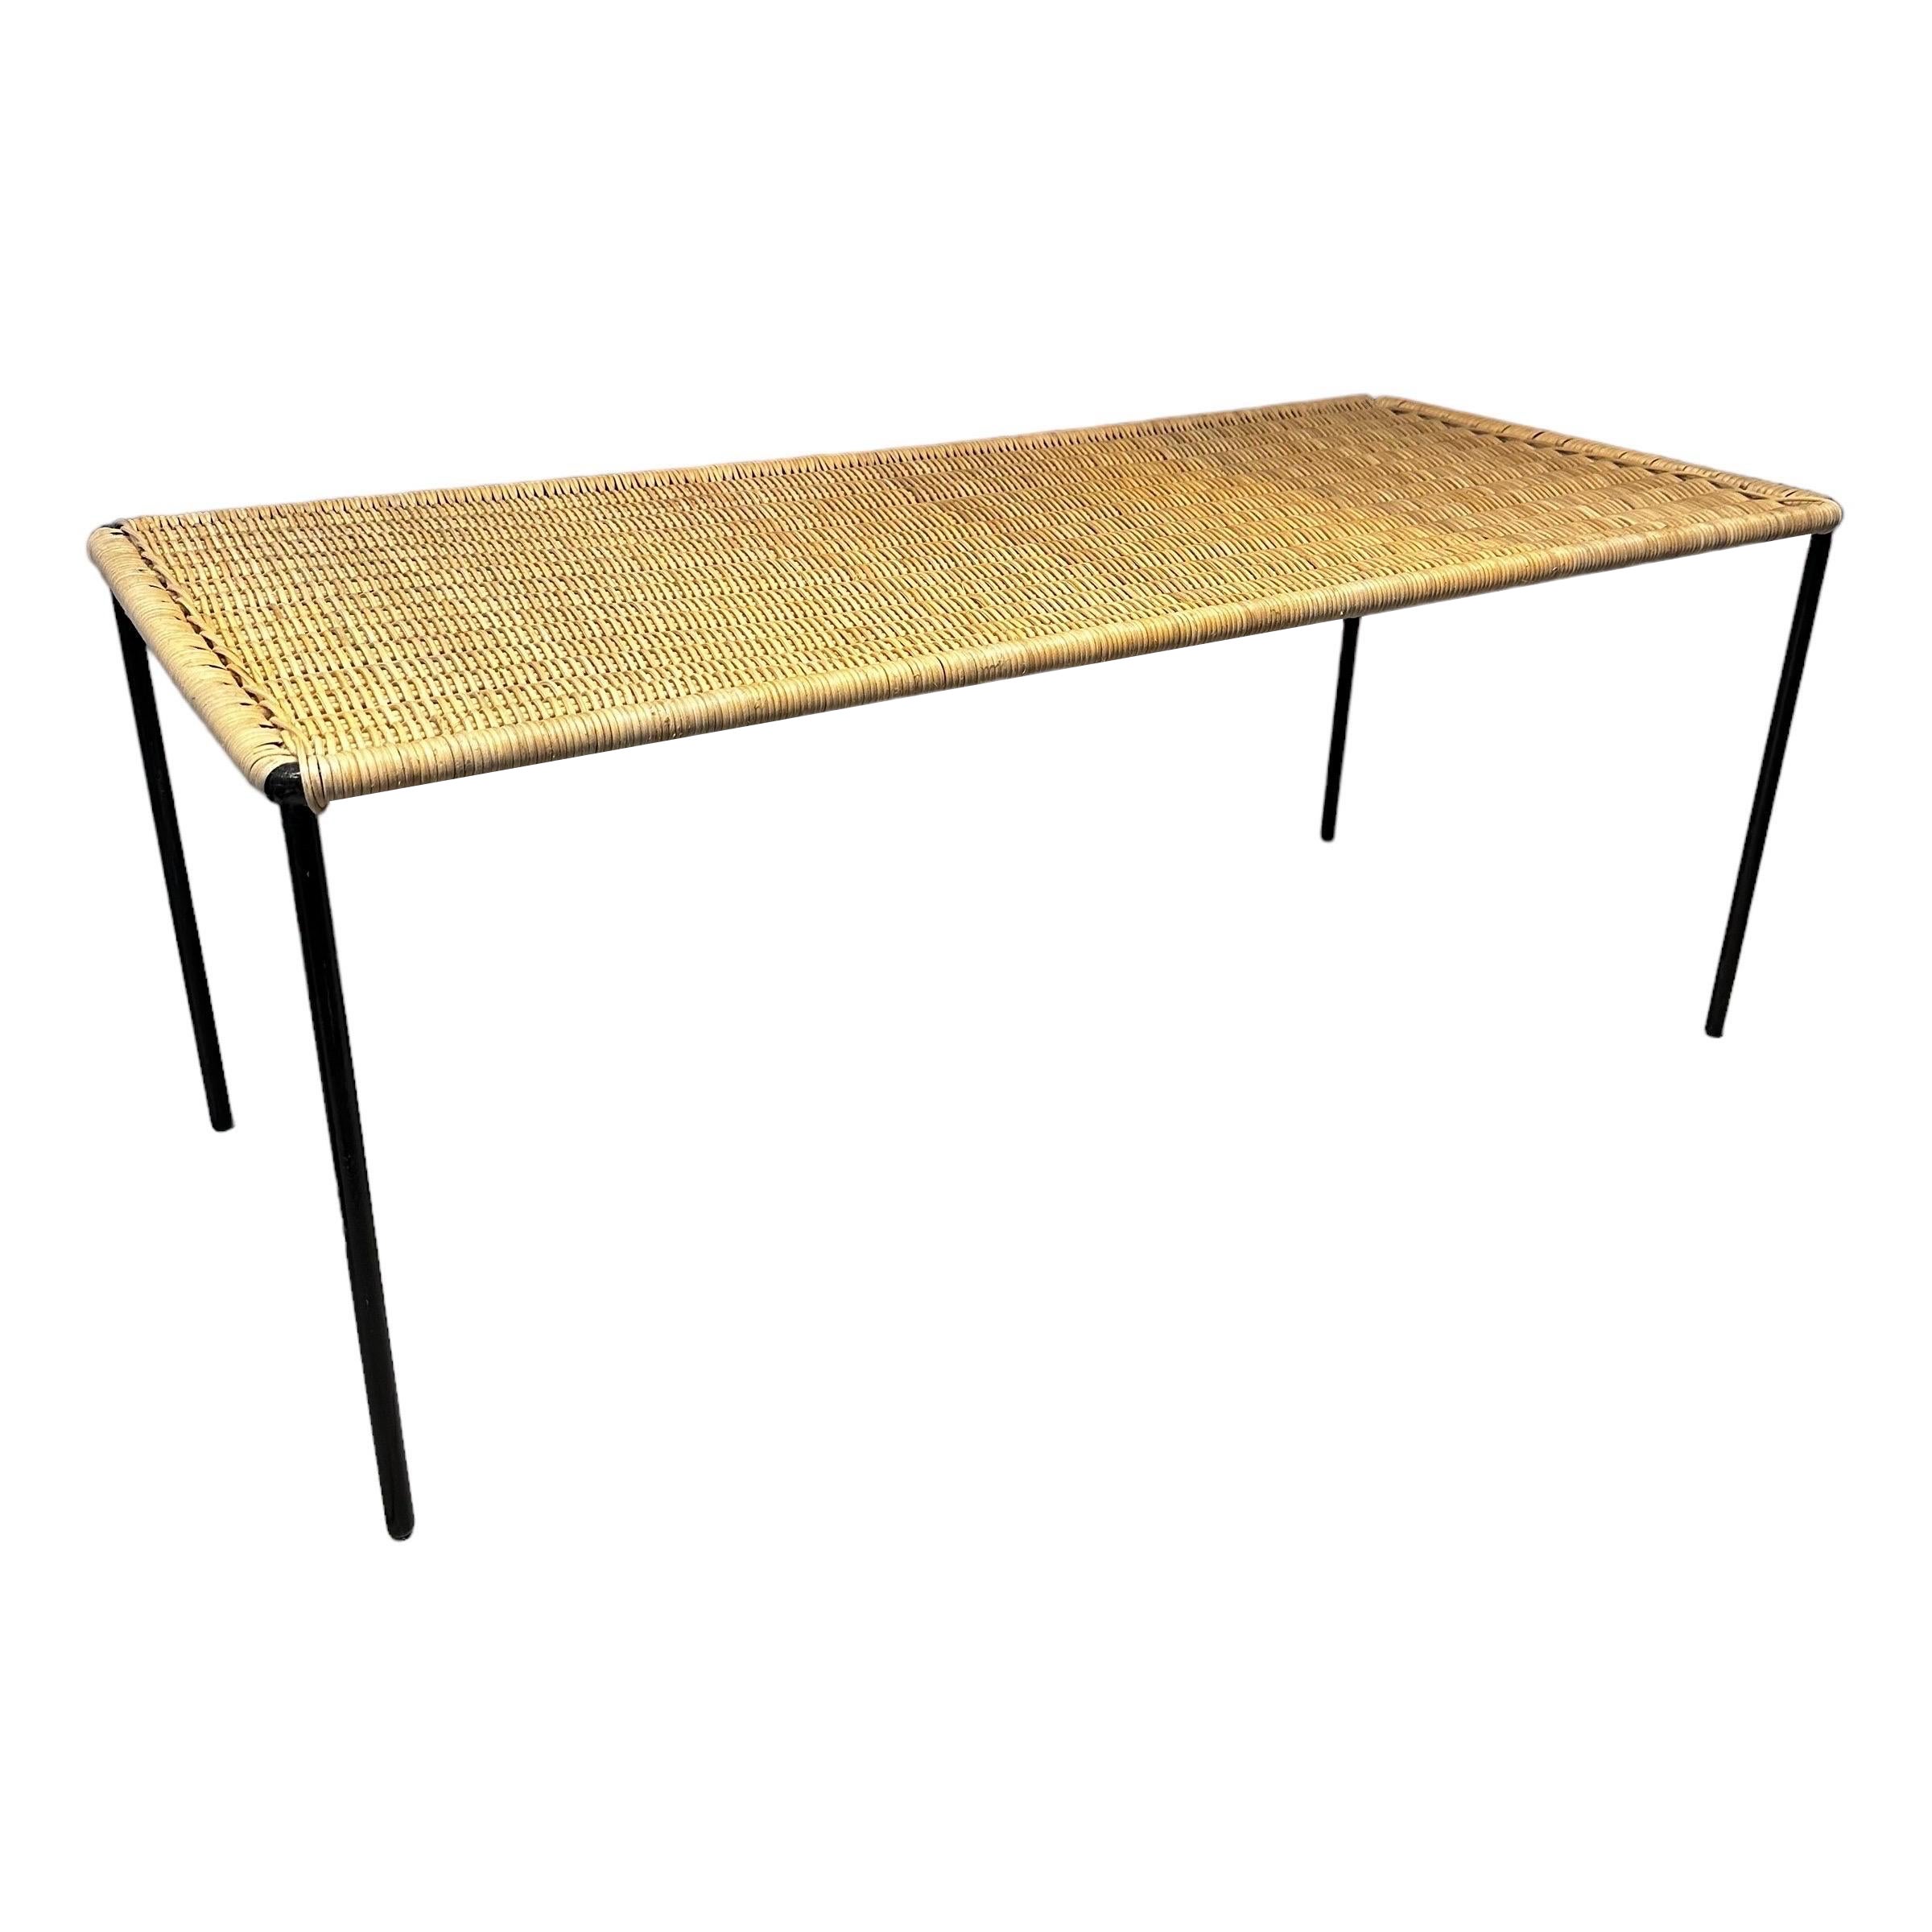 Carl Auböck Mid-Century Coffee Table with Black Iron and Rattan, Austria 1950s For Sale